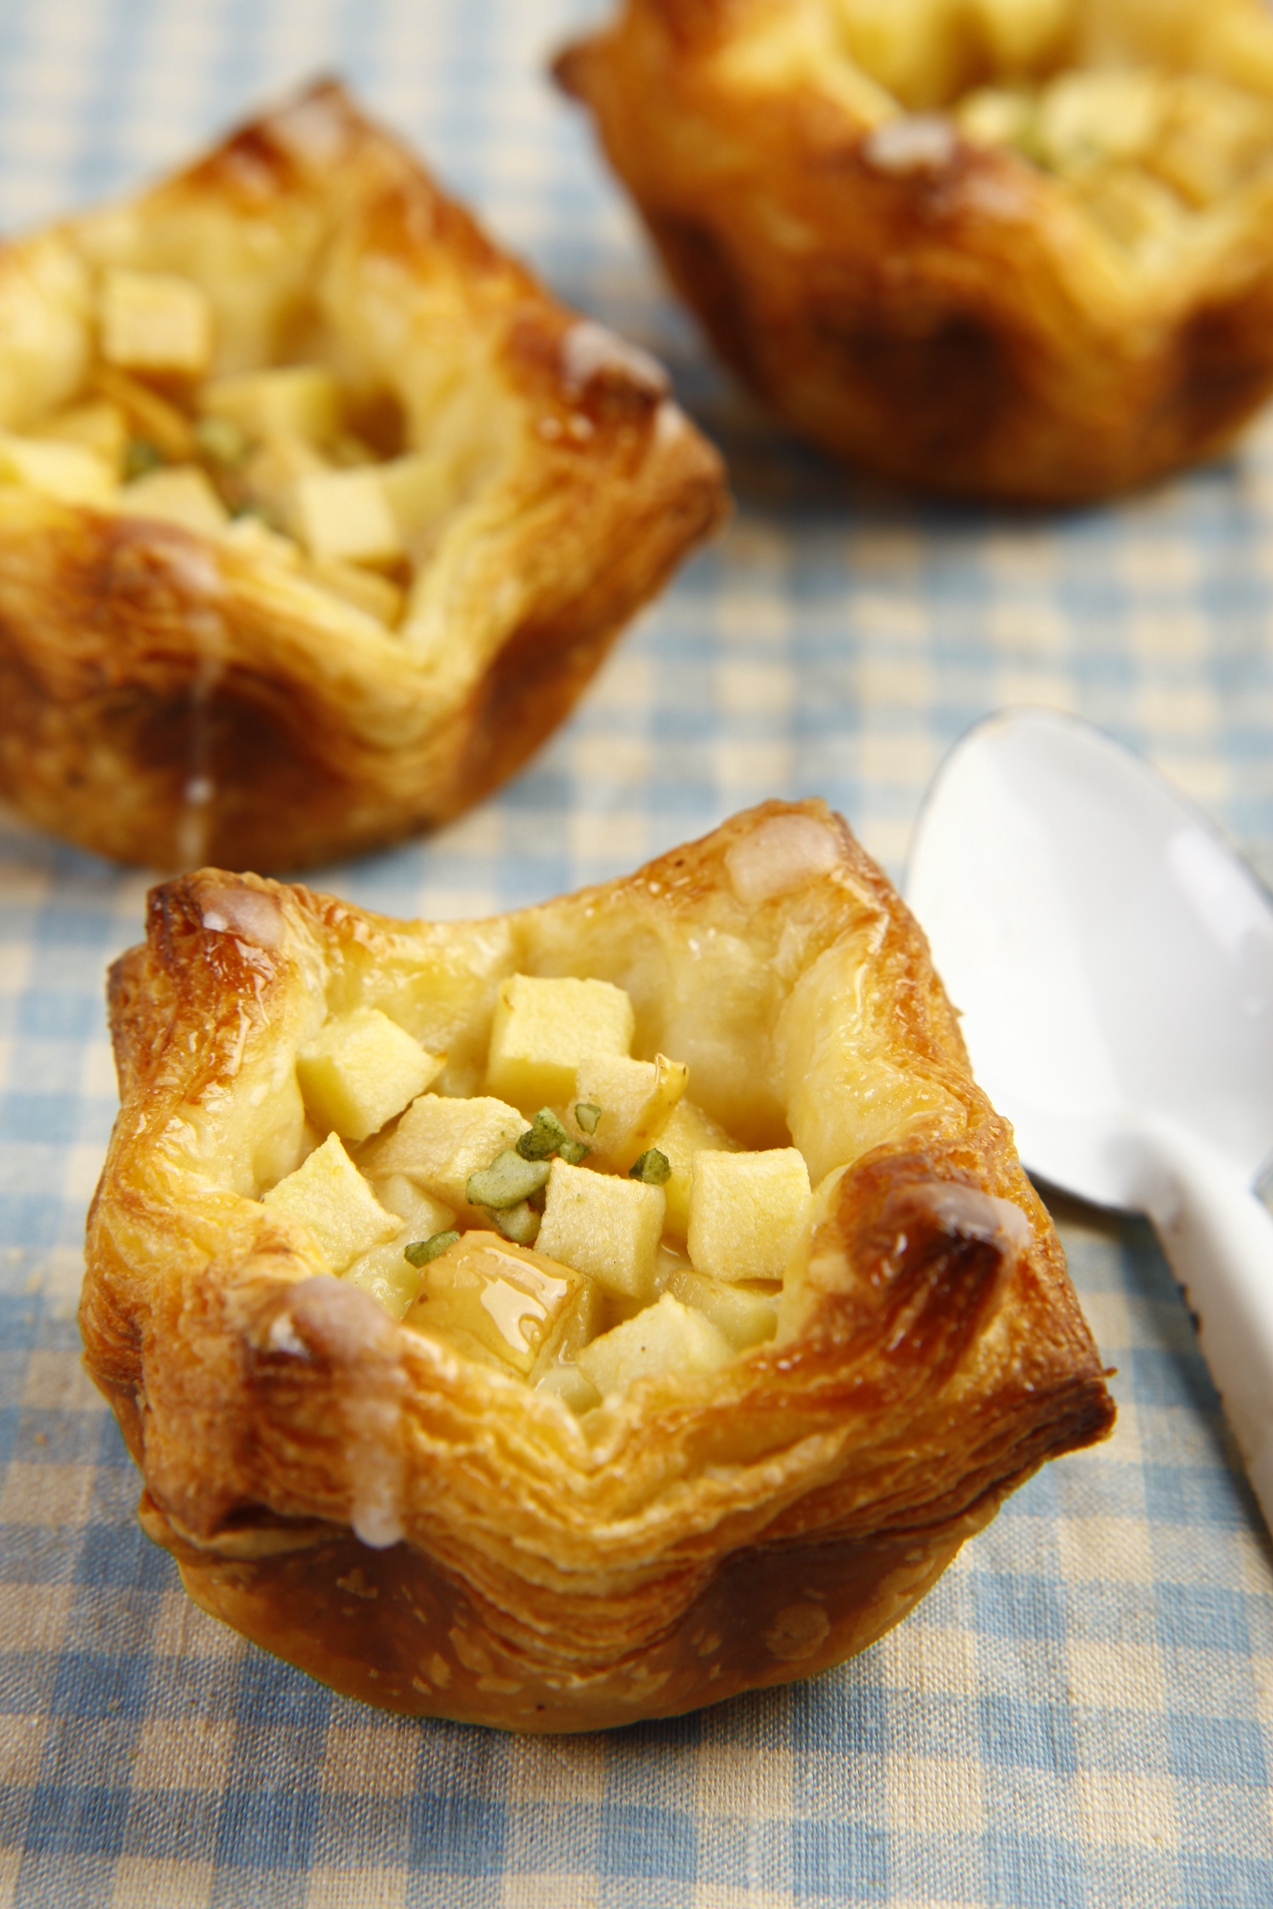 Love Danish pastries and Singapore flavours? Head to The Line Shop at ...